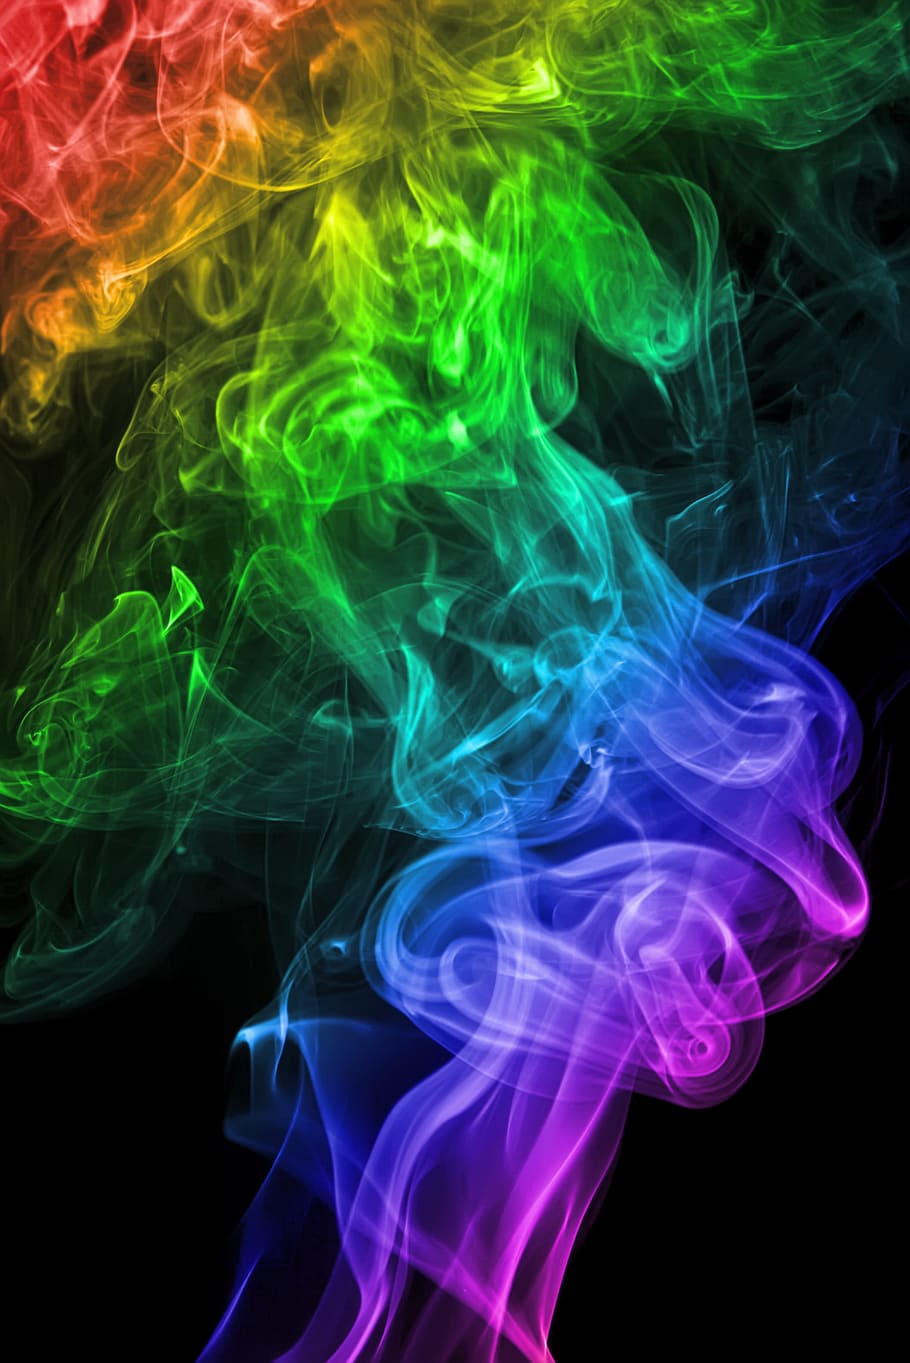 smoke, smell, color, aroma, abstract, background, aromatherapy, pattern, black background, swirl